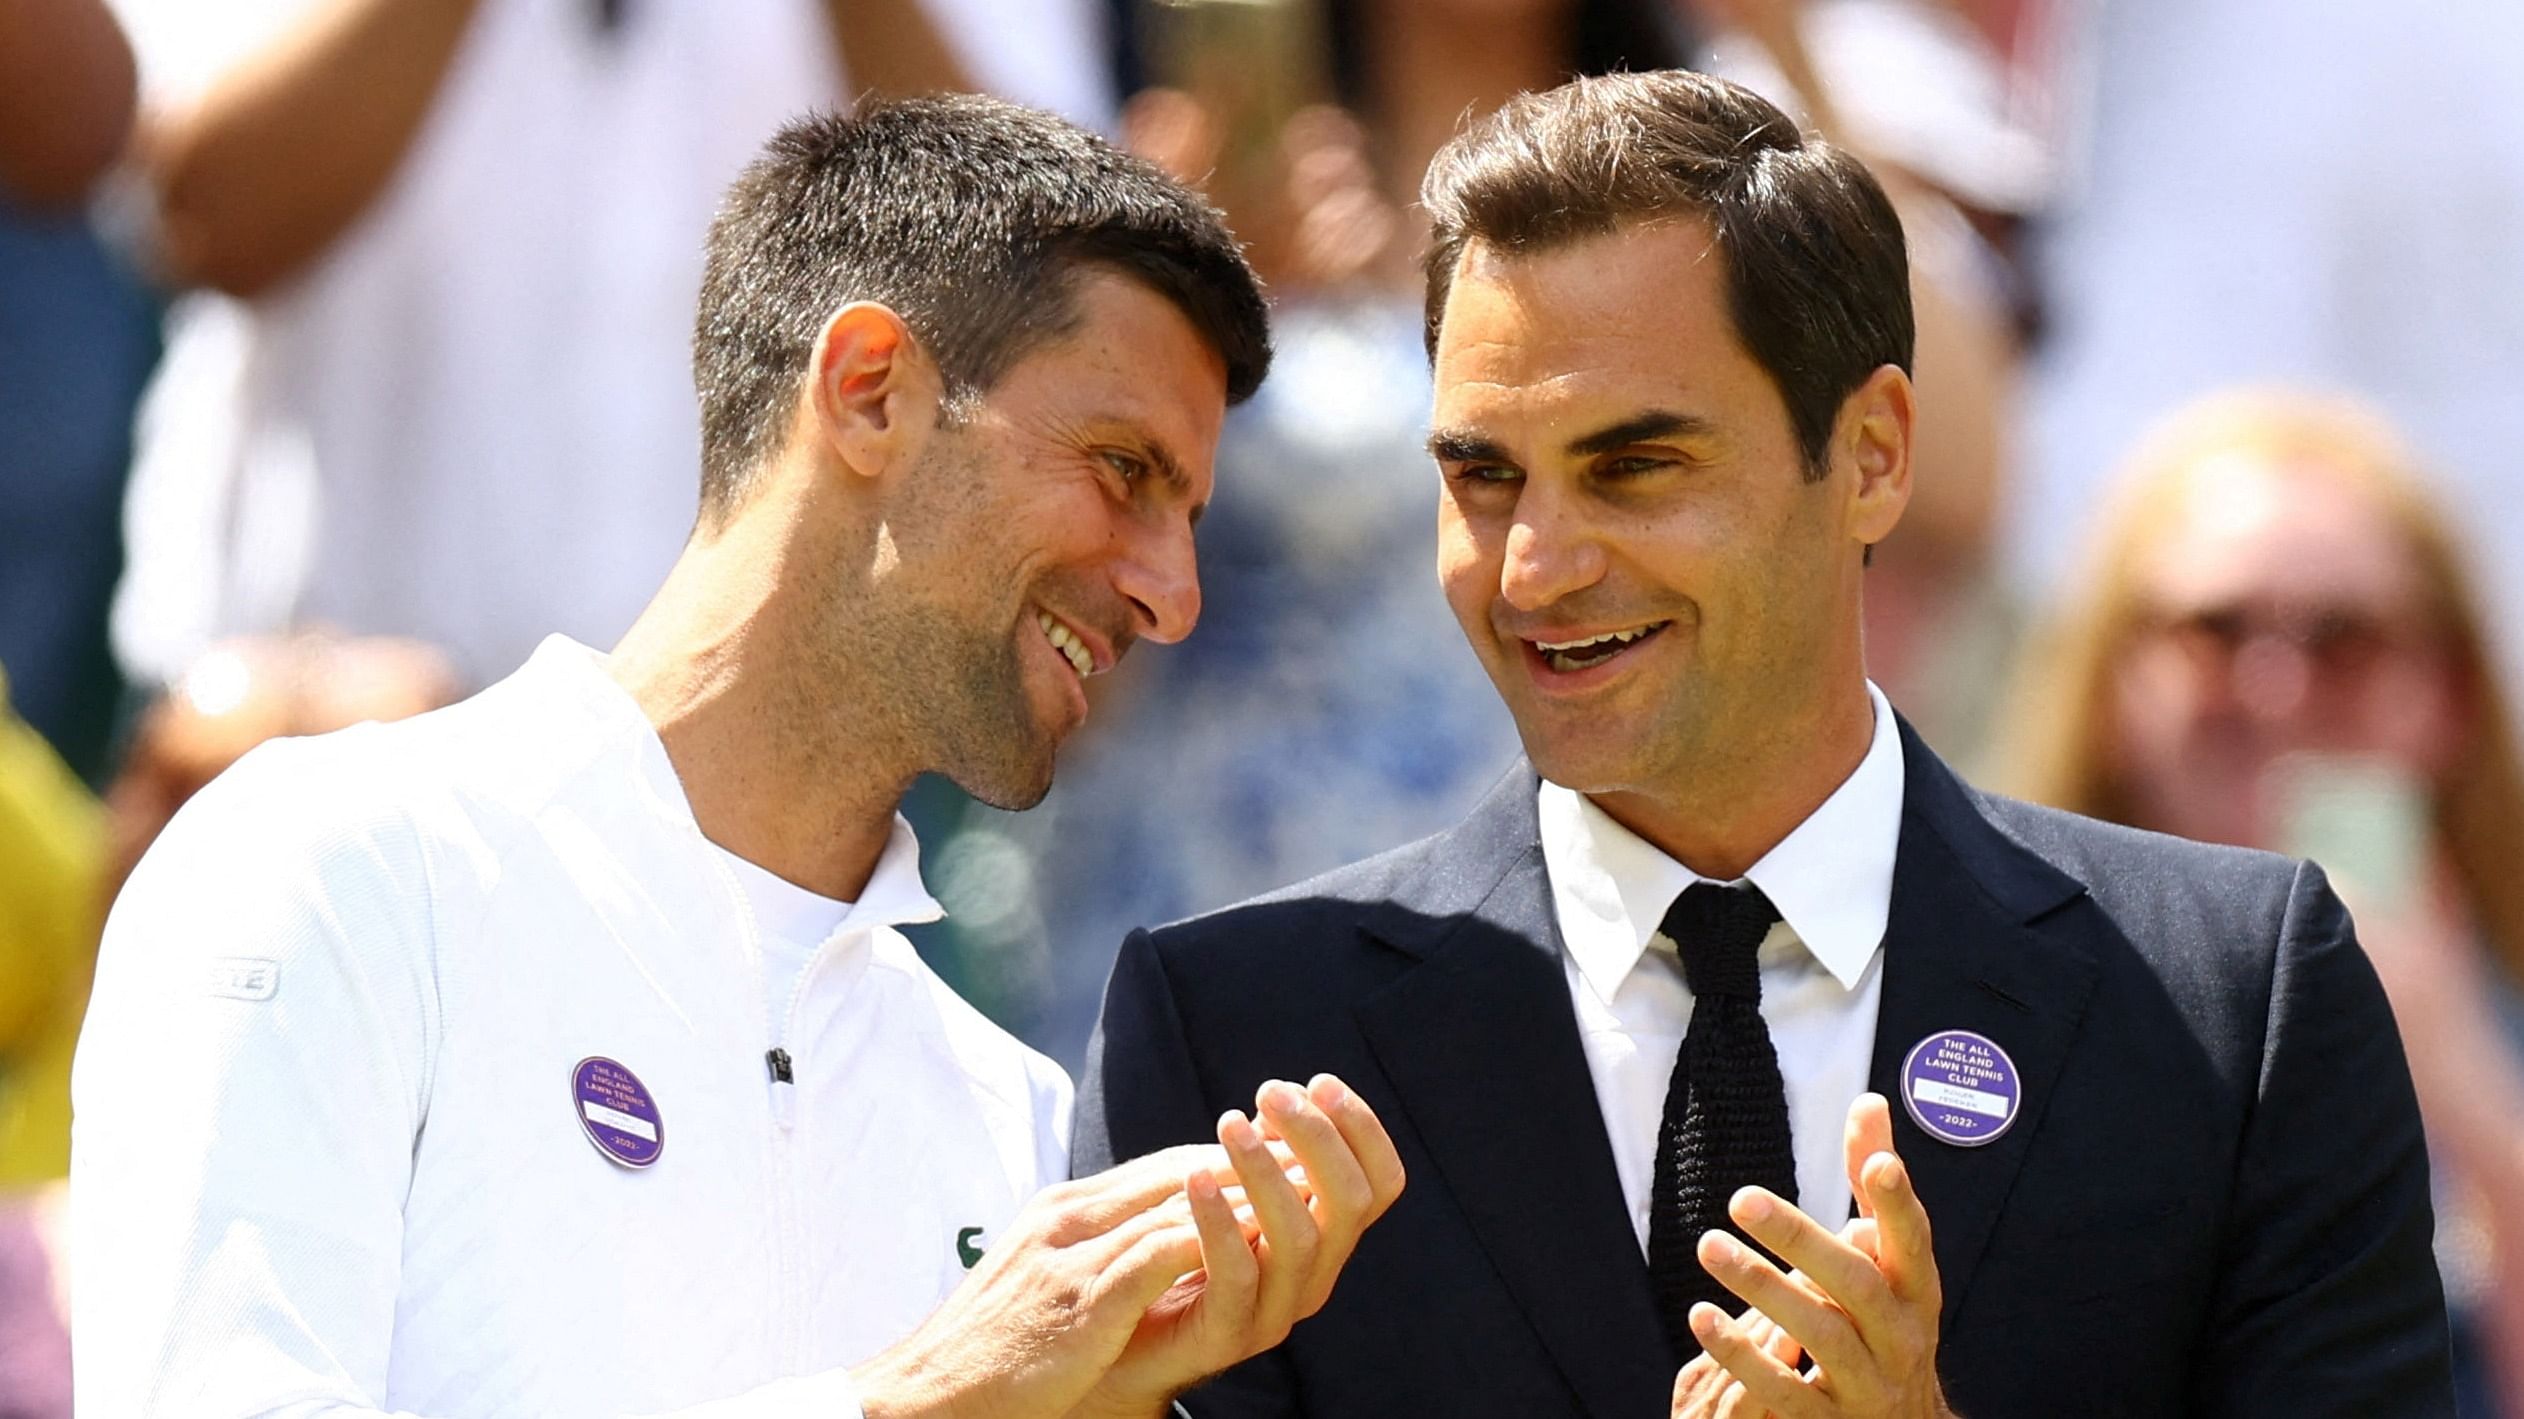 "It's an honour to know you on and off court, and for many more years to come," Djokovic said. 